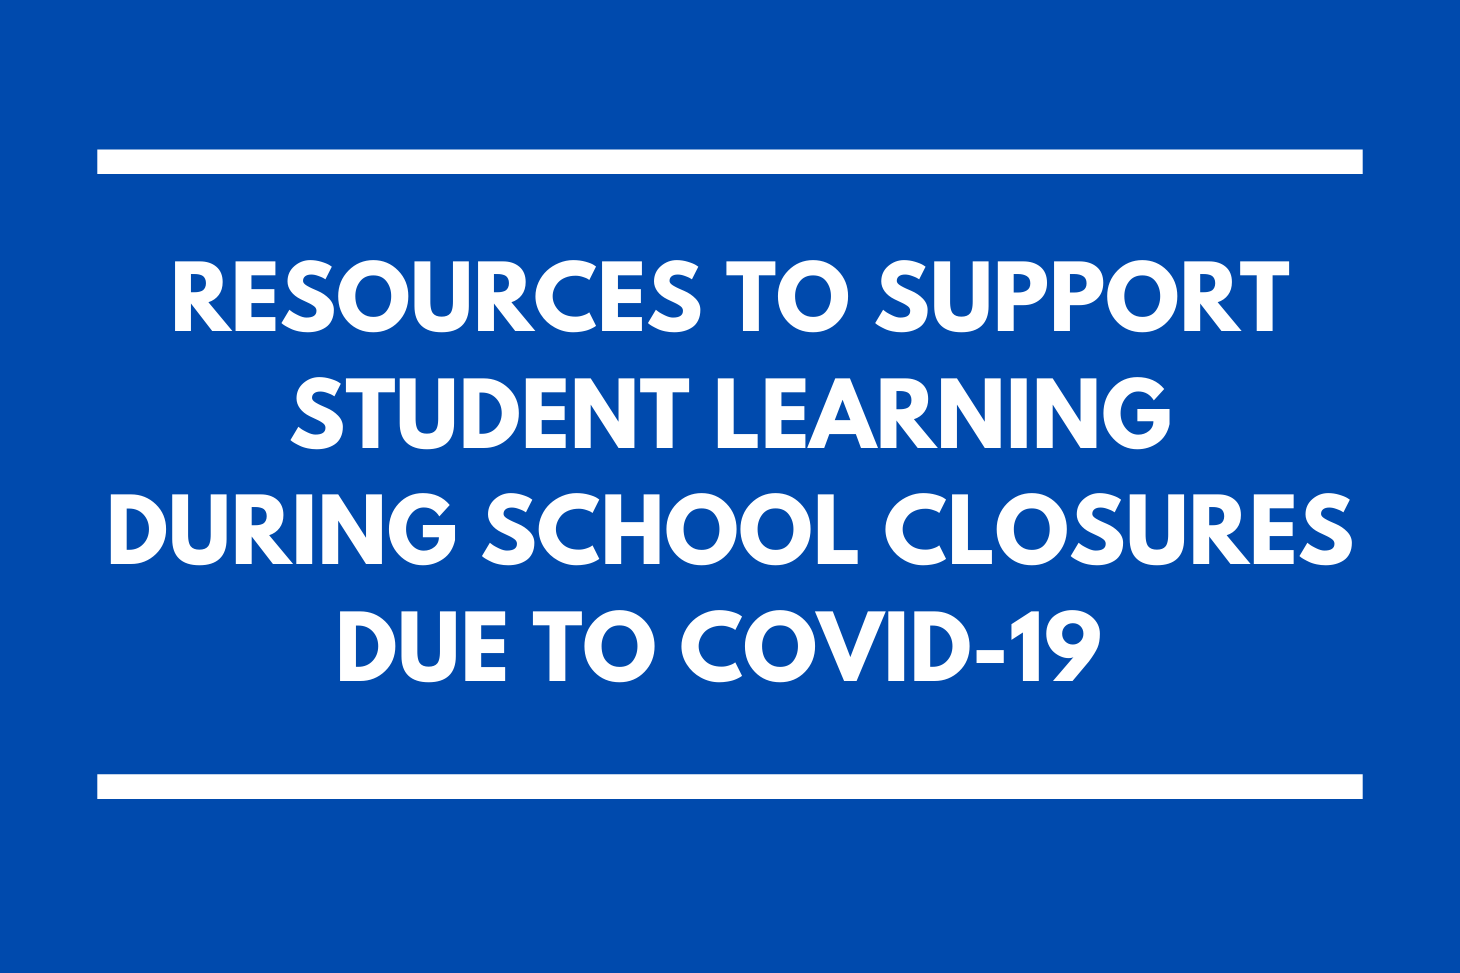 Resources to Support Student Learning Due to School Closures